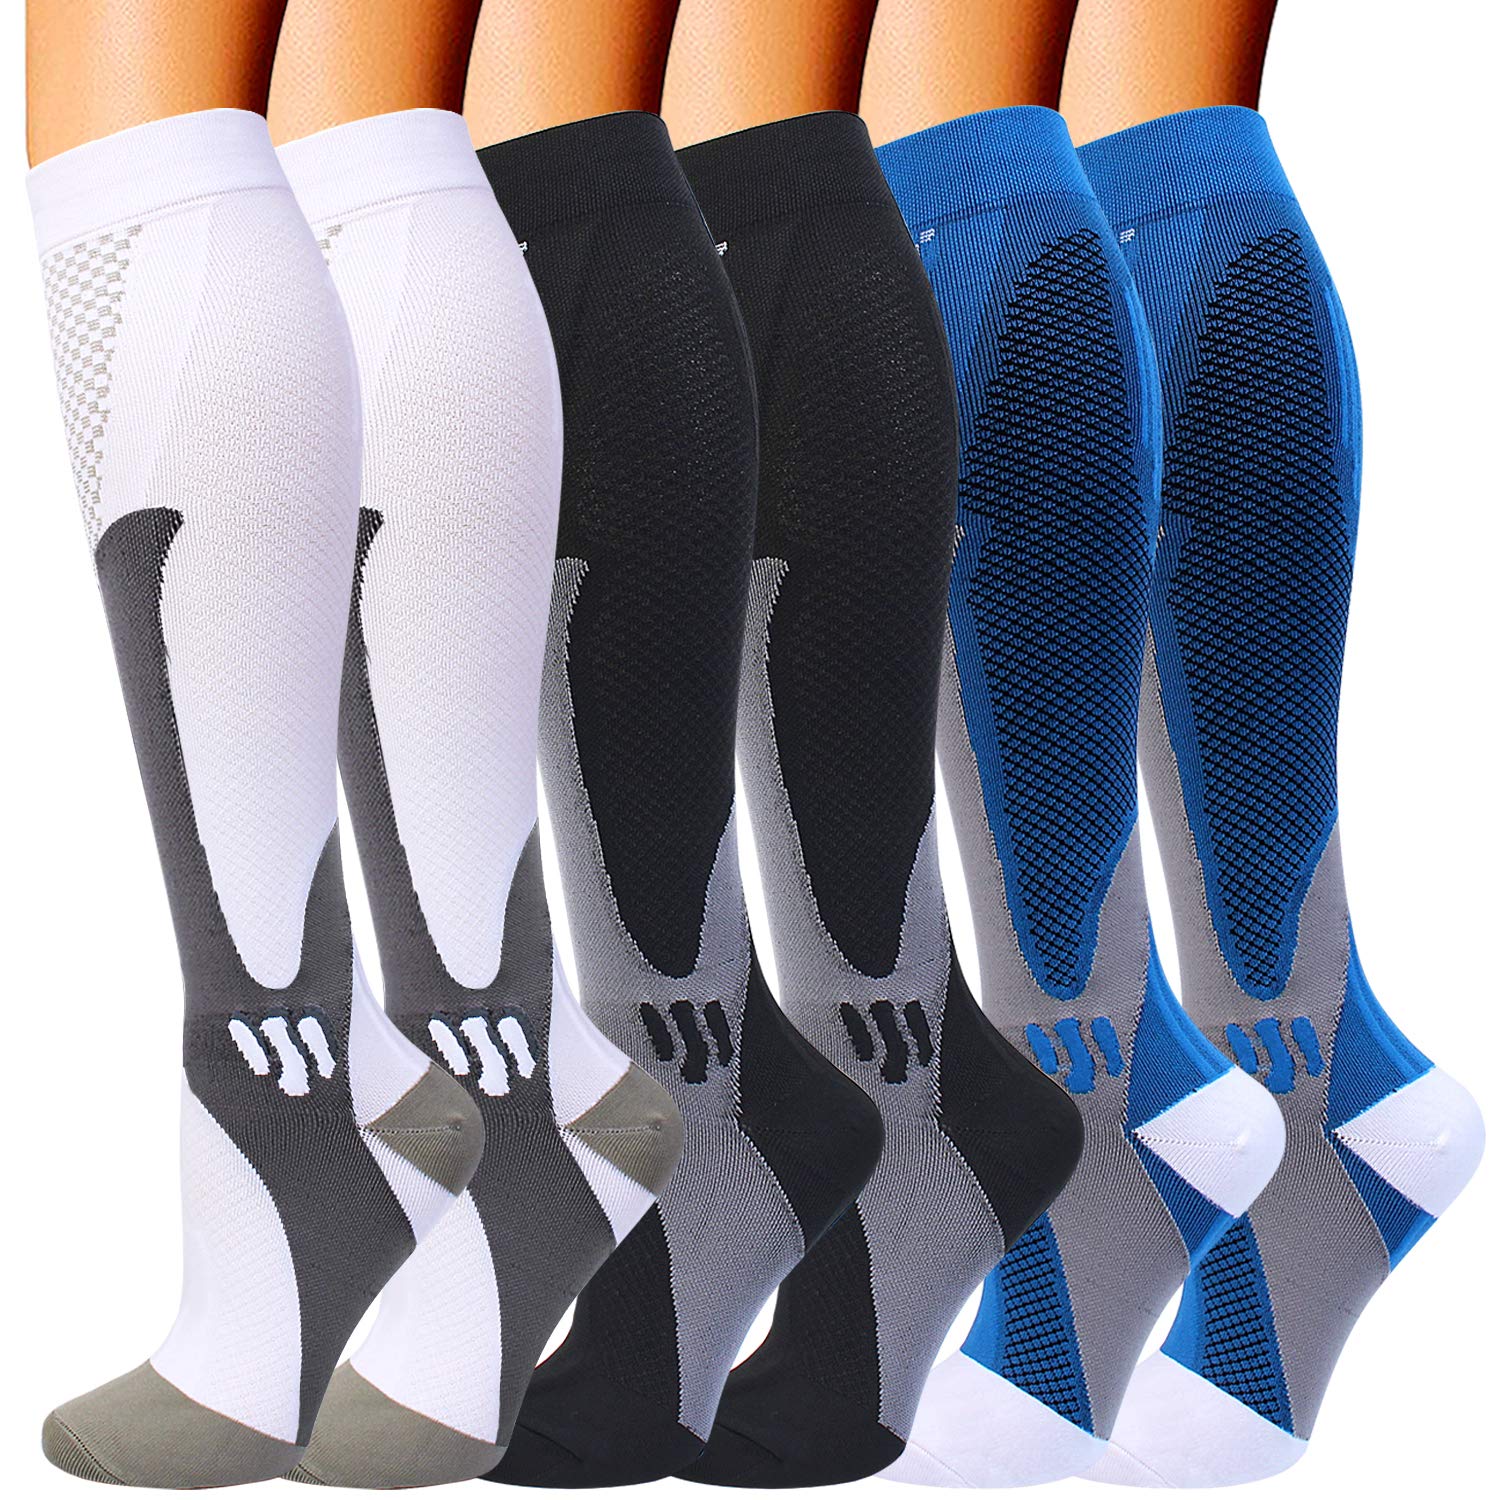 Medical Compression Socks for Women and Men 3 Pairs 20-30 mmHg Knee High  Compression Stockings Circulation Best for Running Athletic Nurses